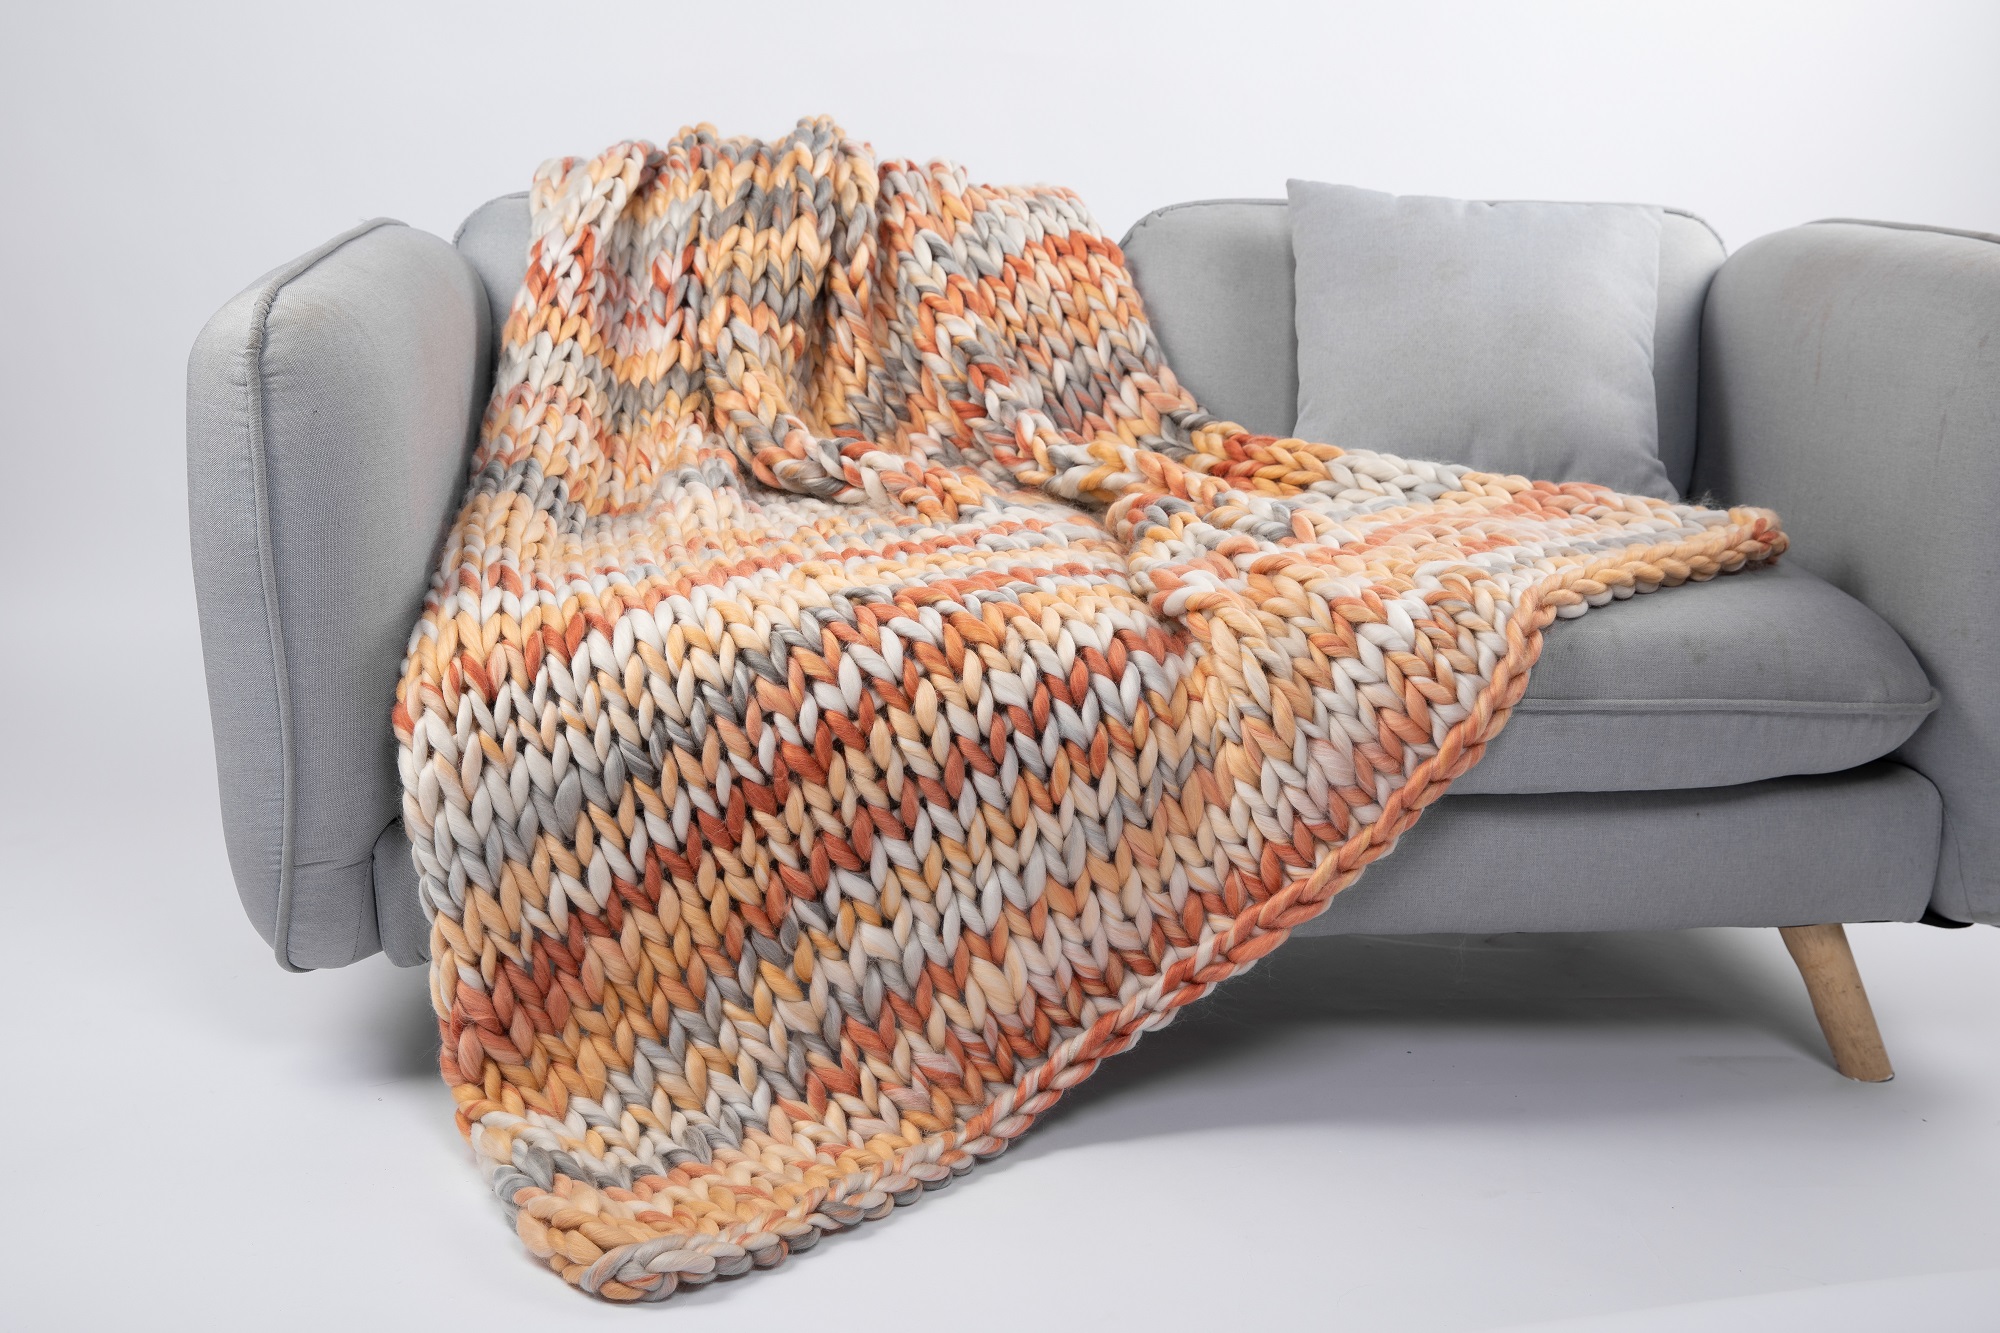 Silver One International Chunky Knitted Throw Blanket, Preppy Soft Hues, 50" x 60" - image 4 of 6